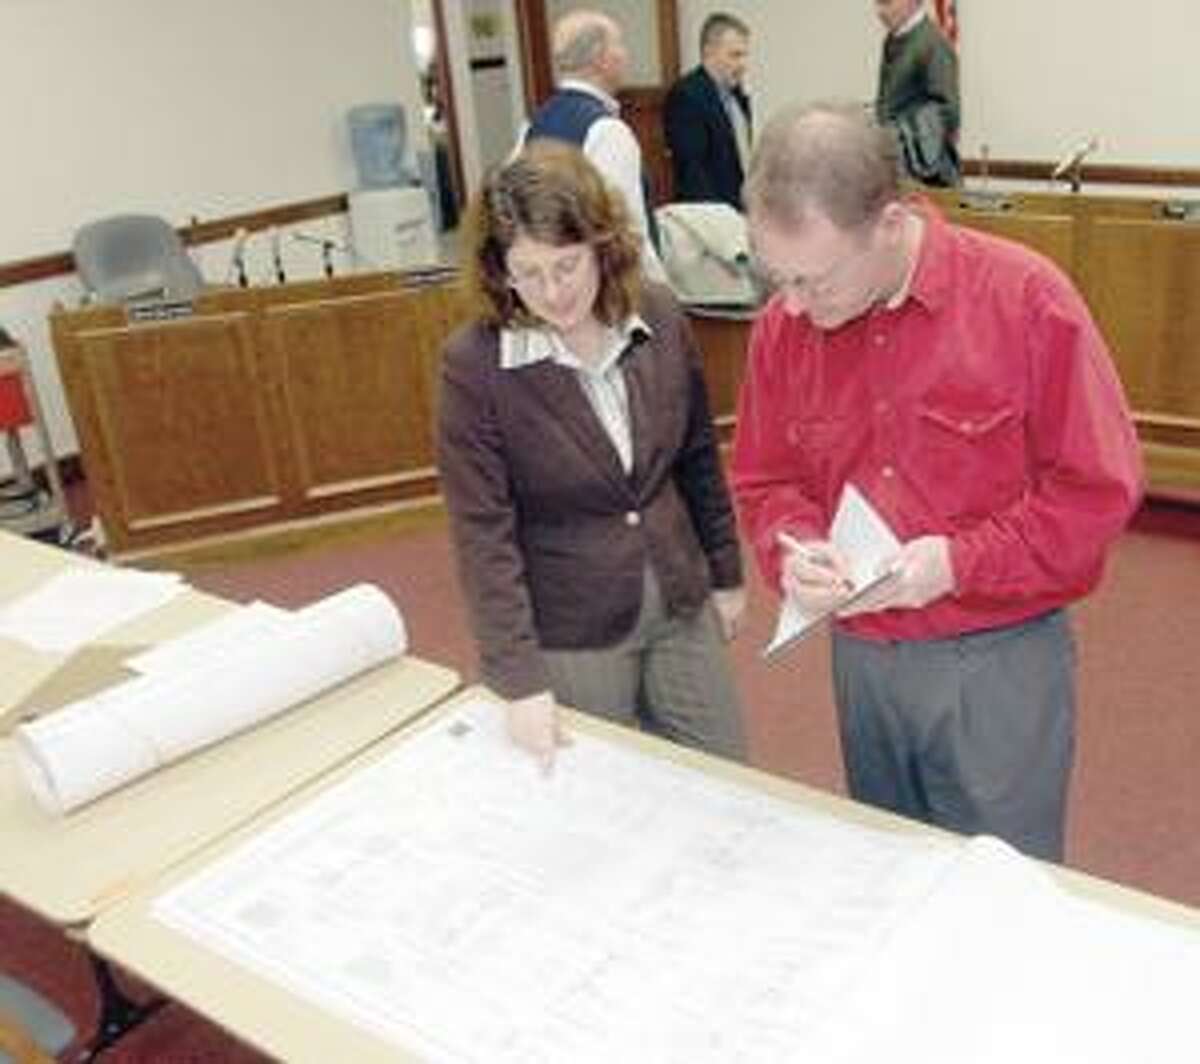 SONJA ZINKE/Register CitizenLorel H. Purcell, Preconstruction Manager for O&G Industries, Inc. talks with Gene Farley of the Torrington Lumber Company during the walk through at City Hall Thursday. Purchase a glossy print of this photo and more at www.registercitizen.com